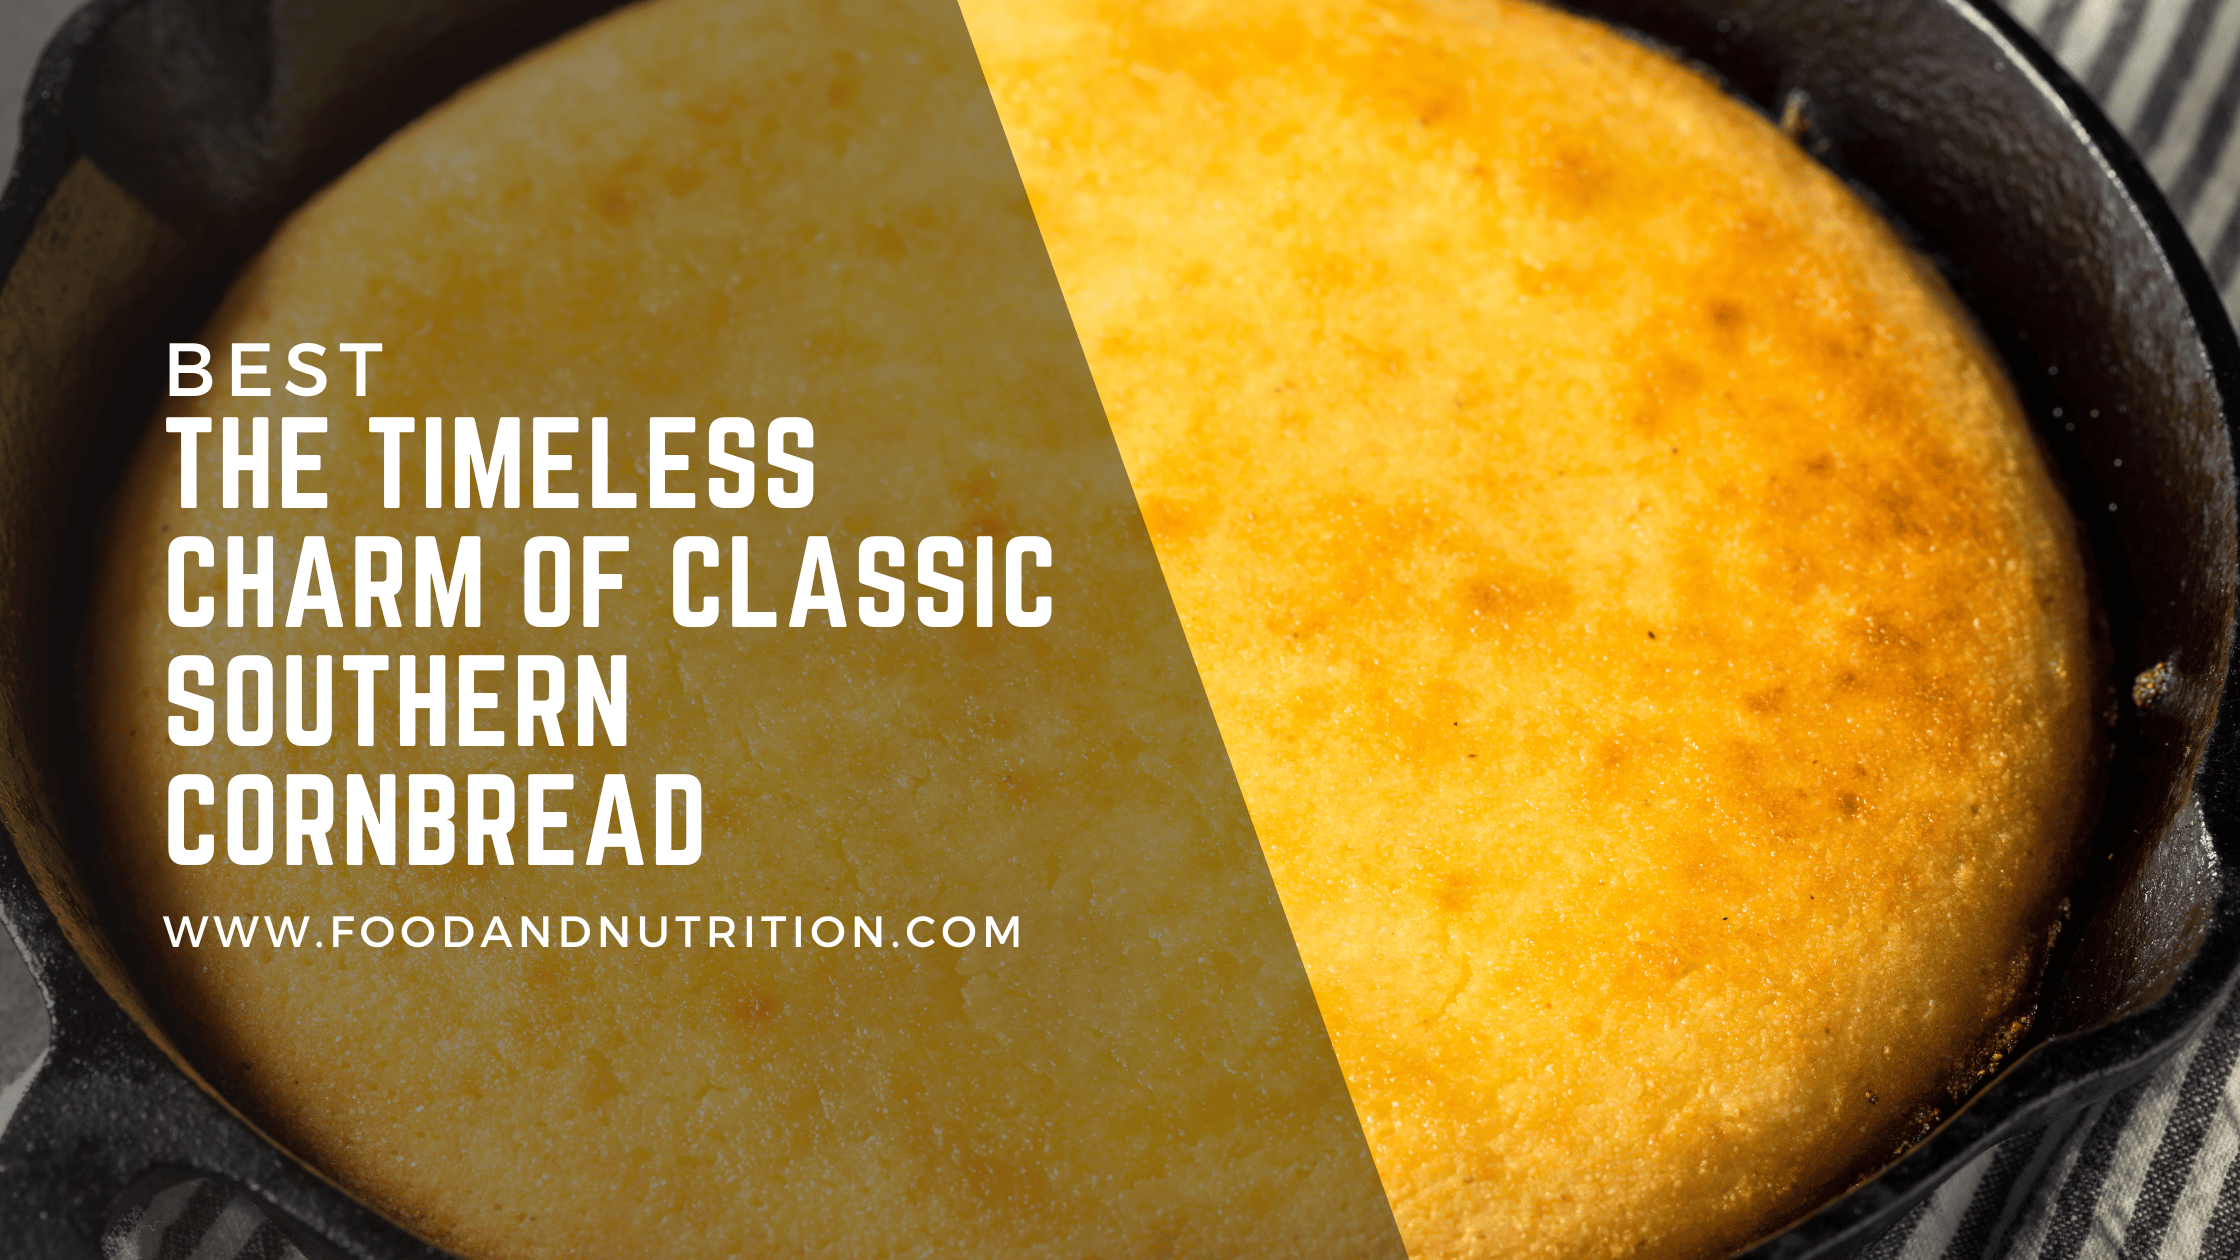 The Timeless Charm of Classic Southern Cornbread